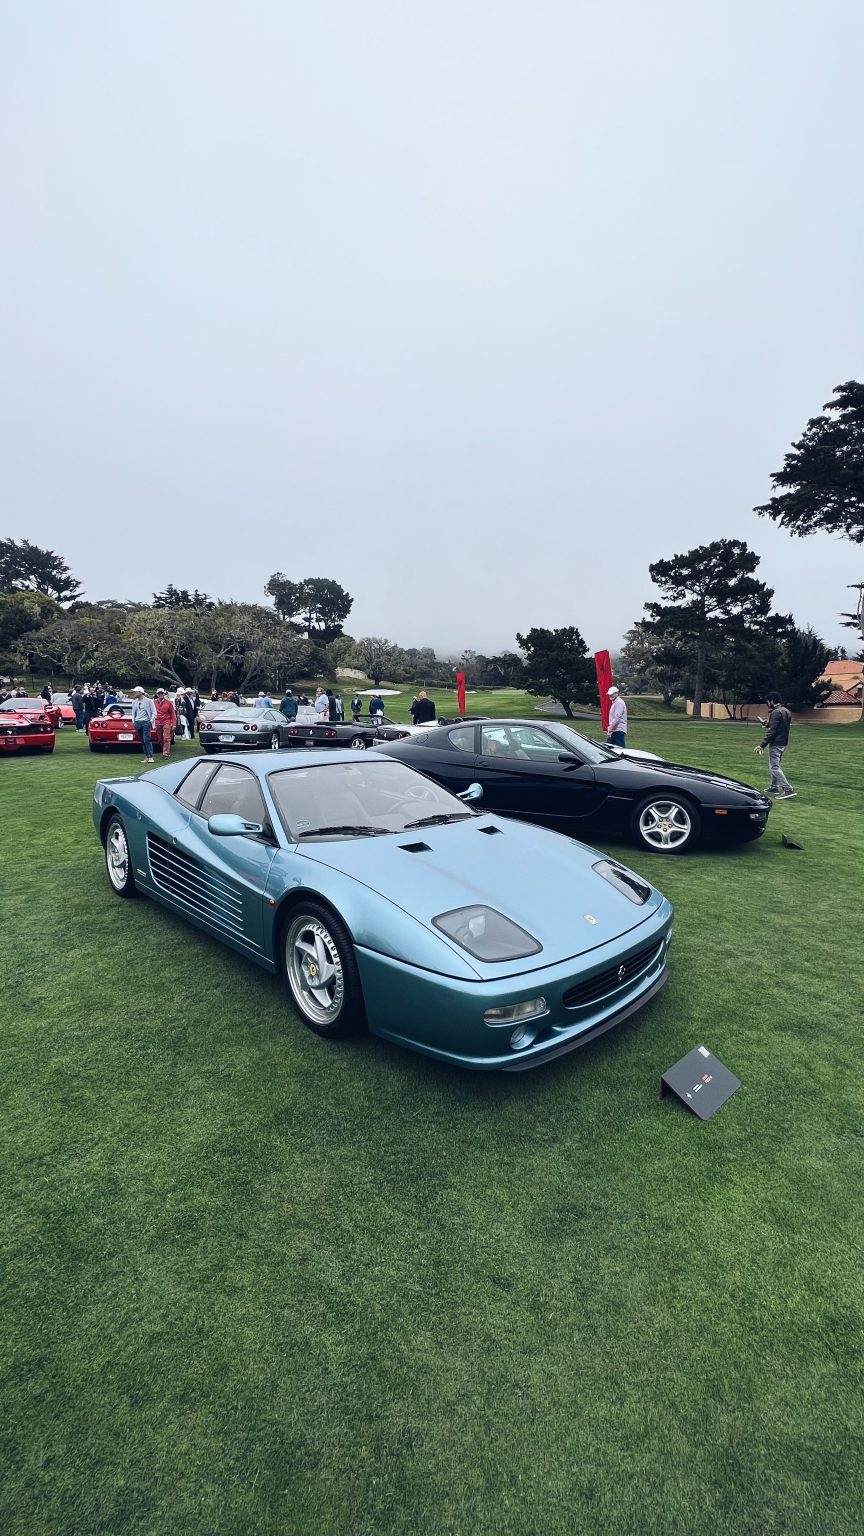 Impressions from Monterey Car Week 2022